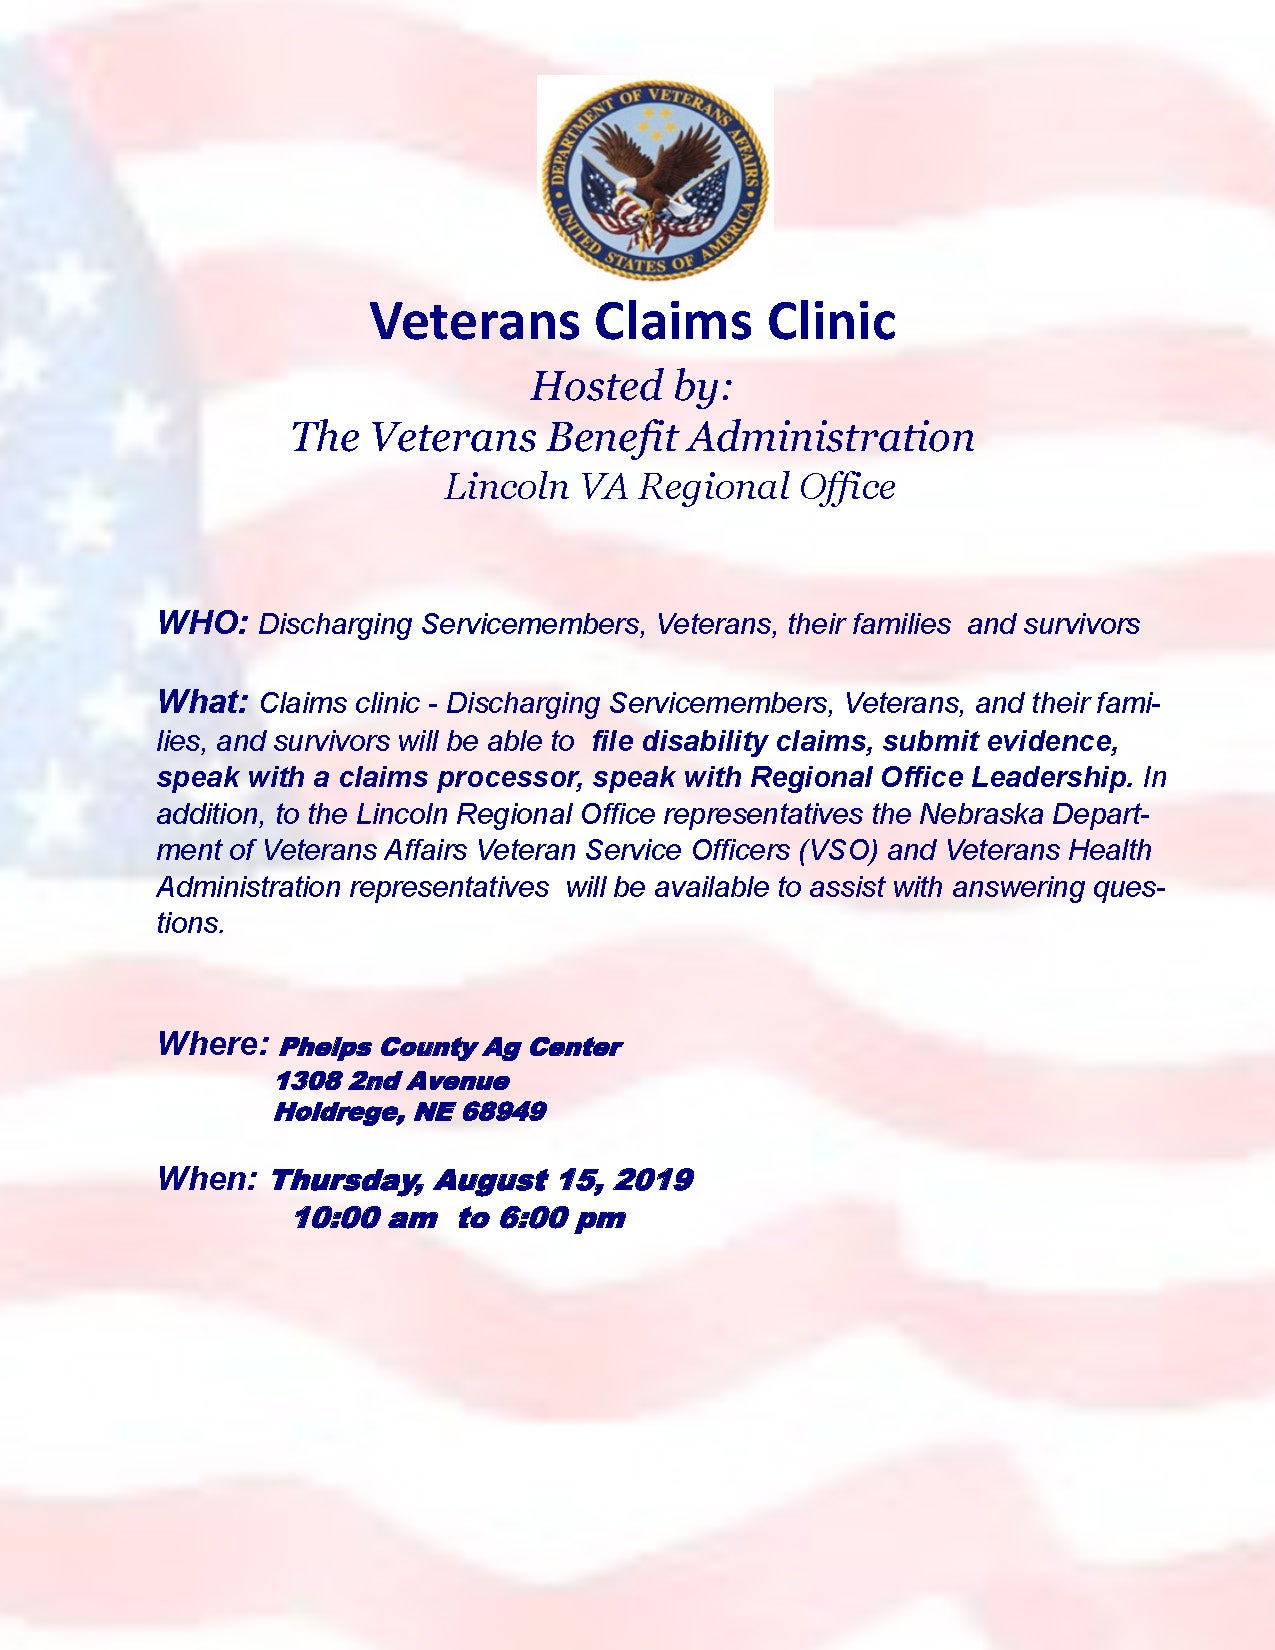 Veterans Claims Clinic, Holdrege